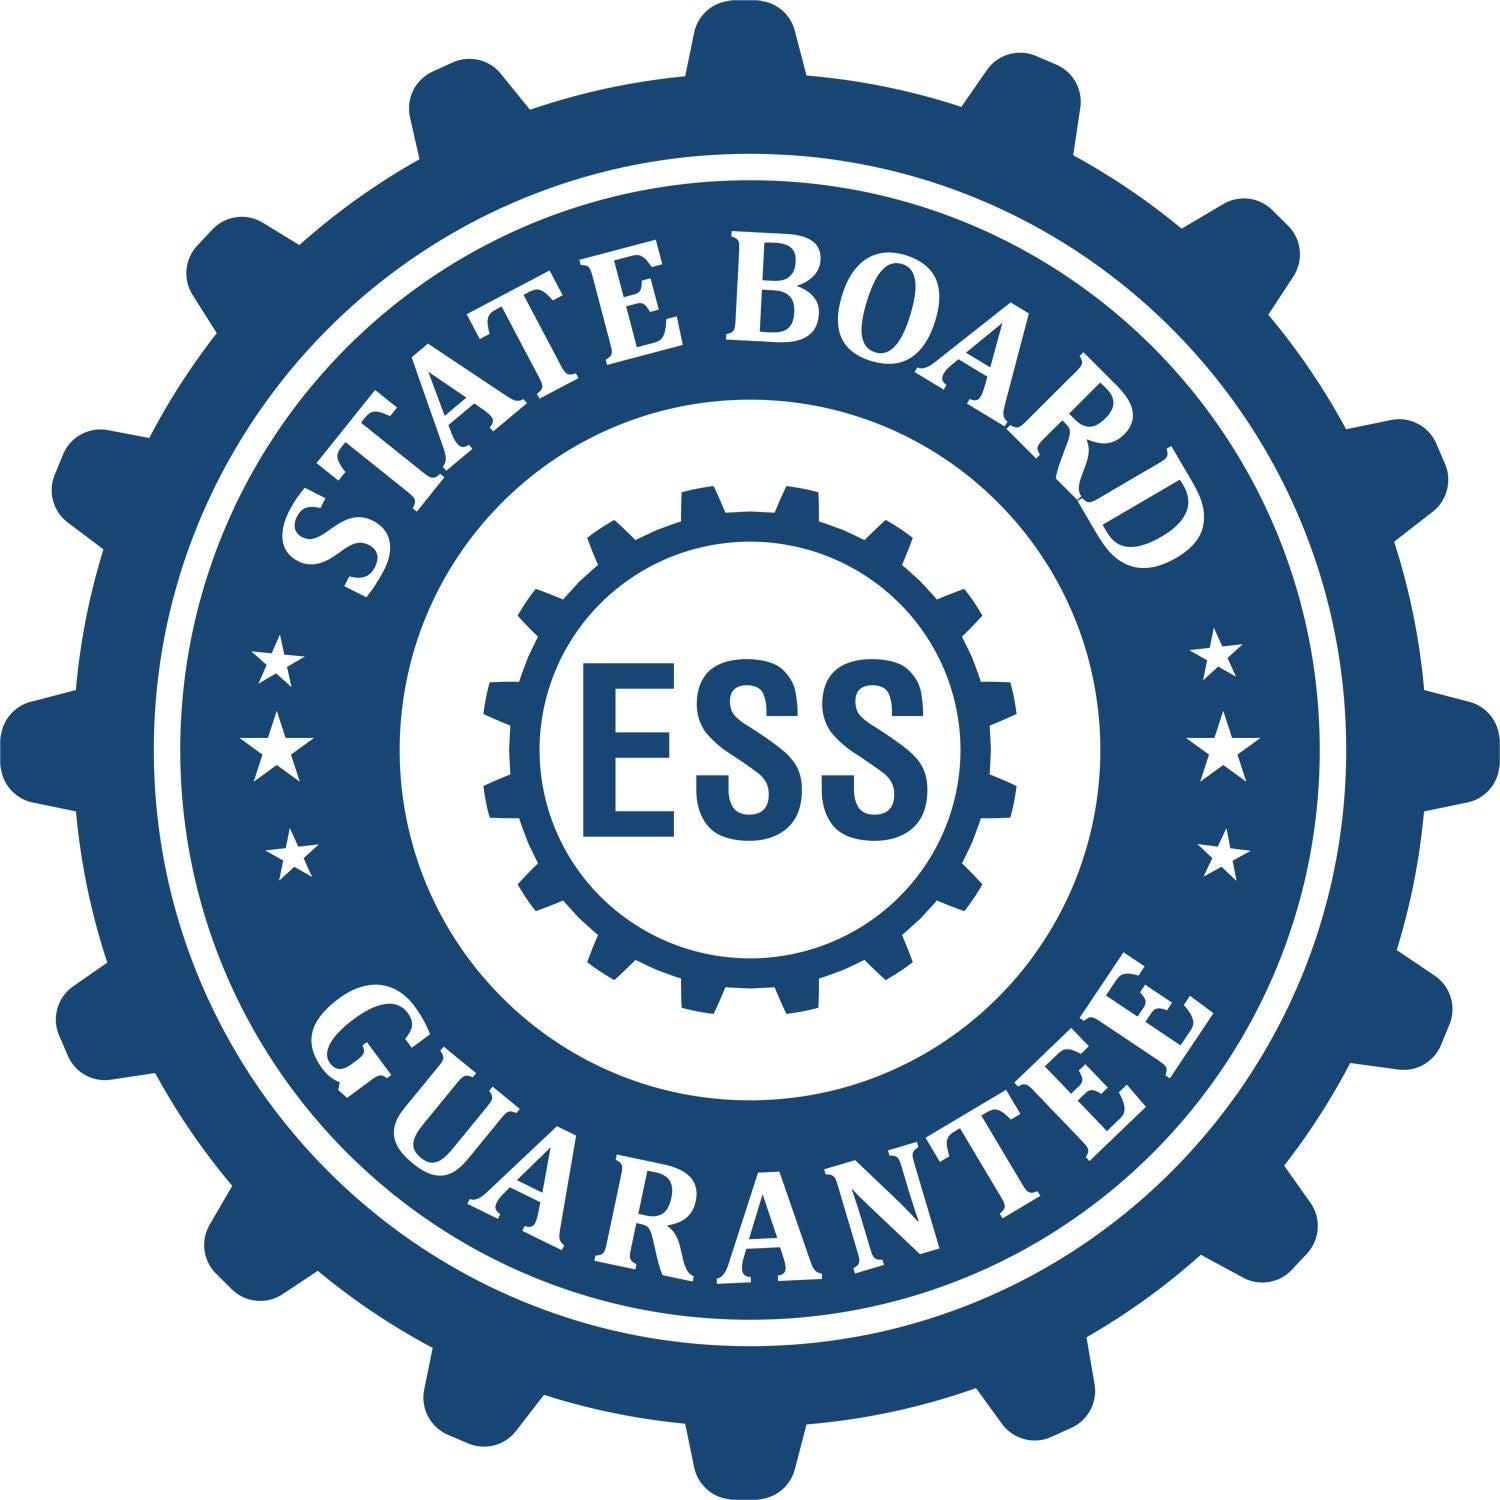 An emblem in a gear shape illustrating a state board guarantee for the Tennessee Long Reach Landscape Architect Embossing Stamp product.